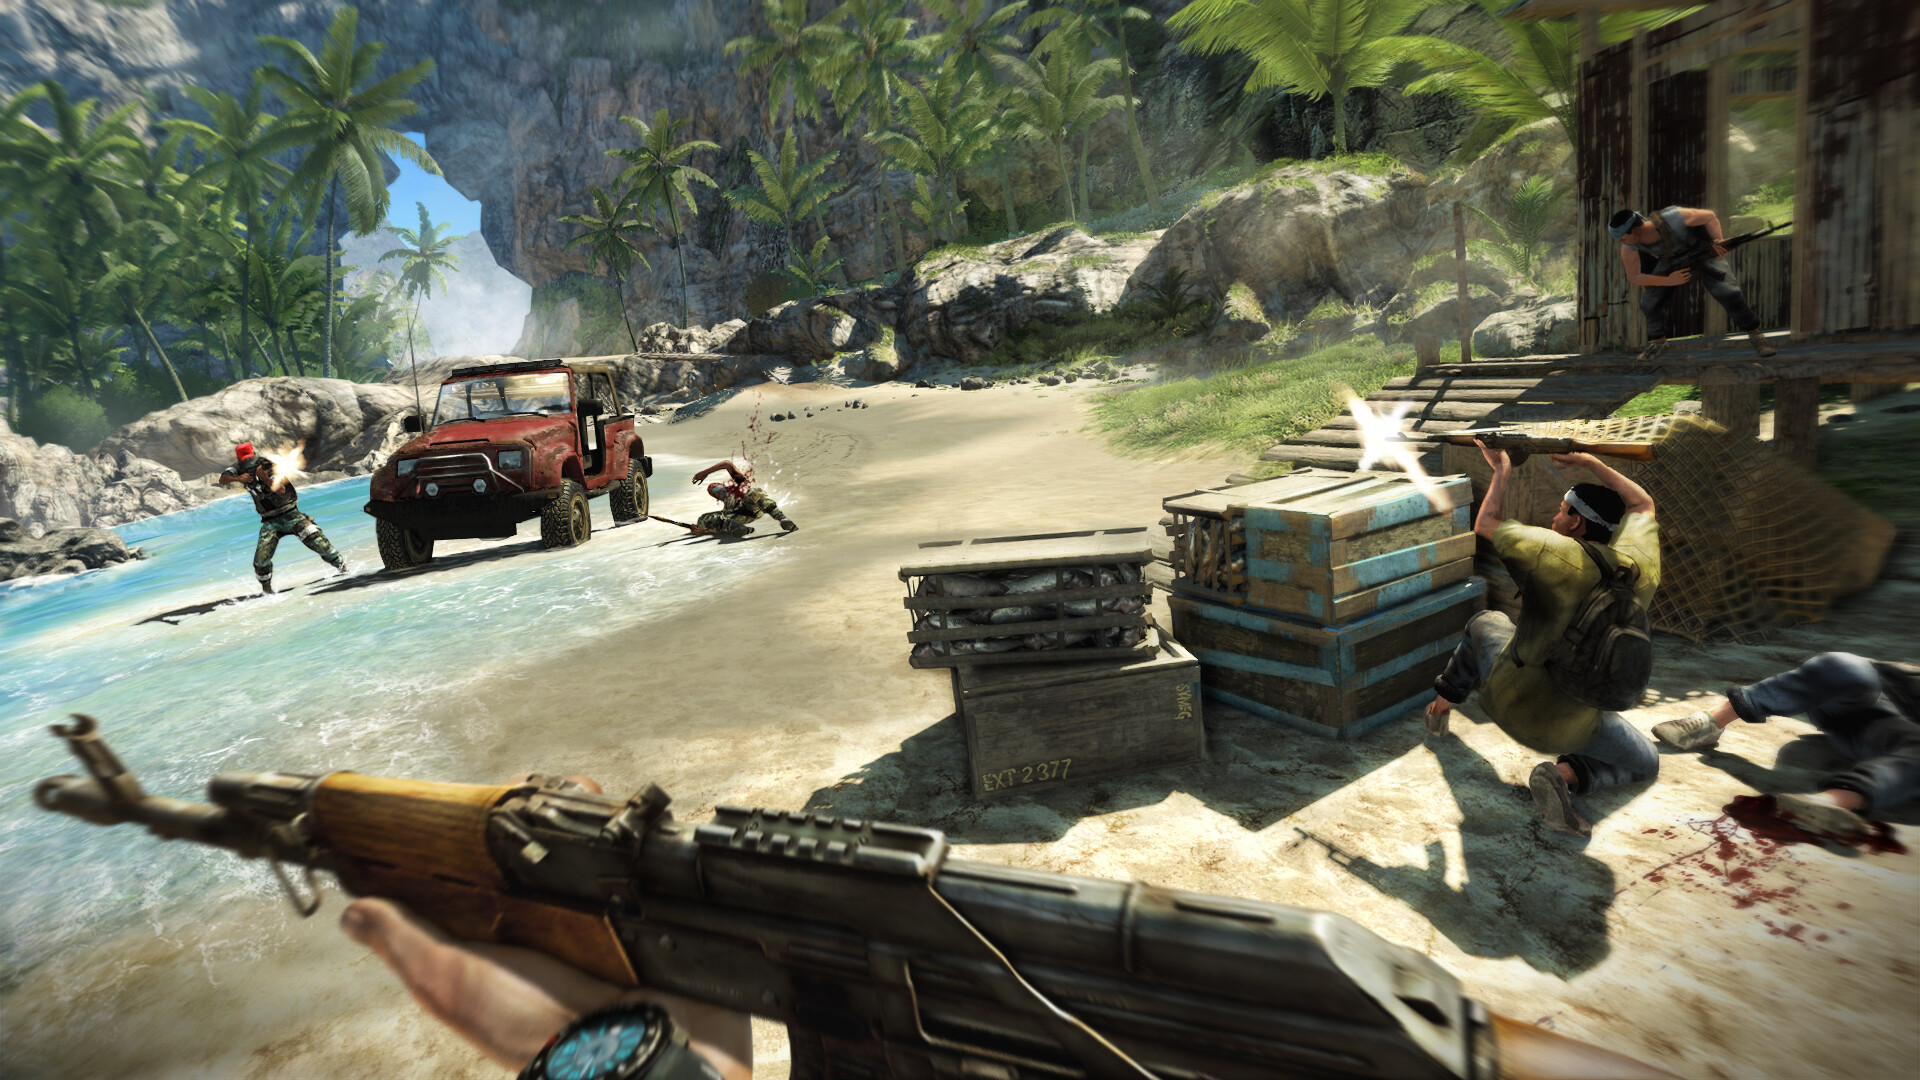 Far Cry 3: The game is set on a tropical island between the Indian and Pacific Oceans. 1920x1080 Full HD Background.